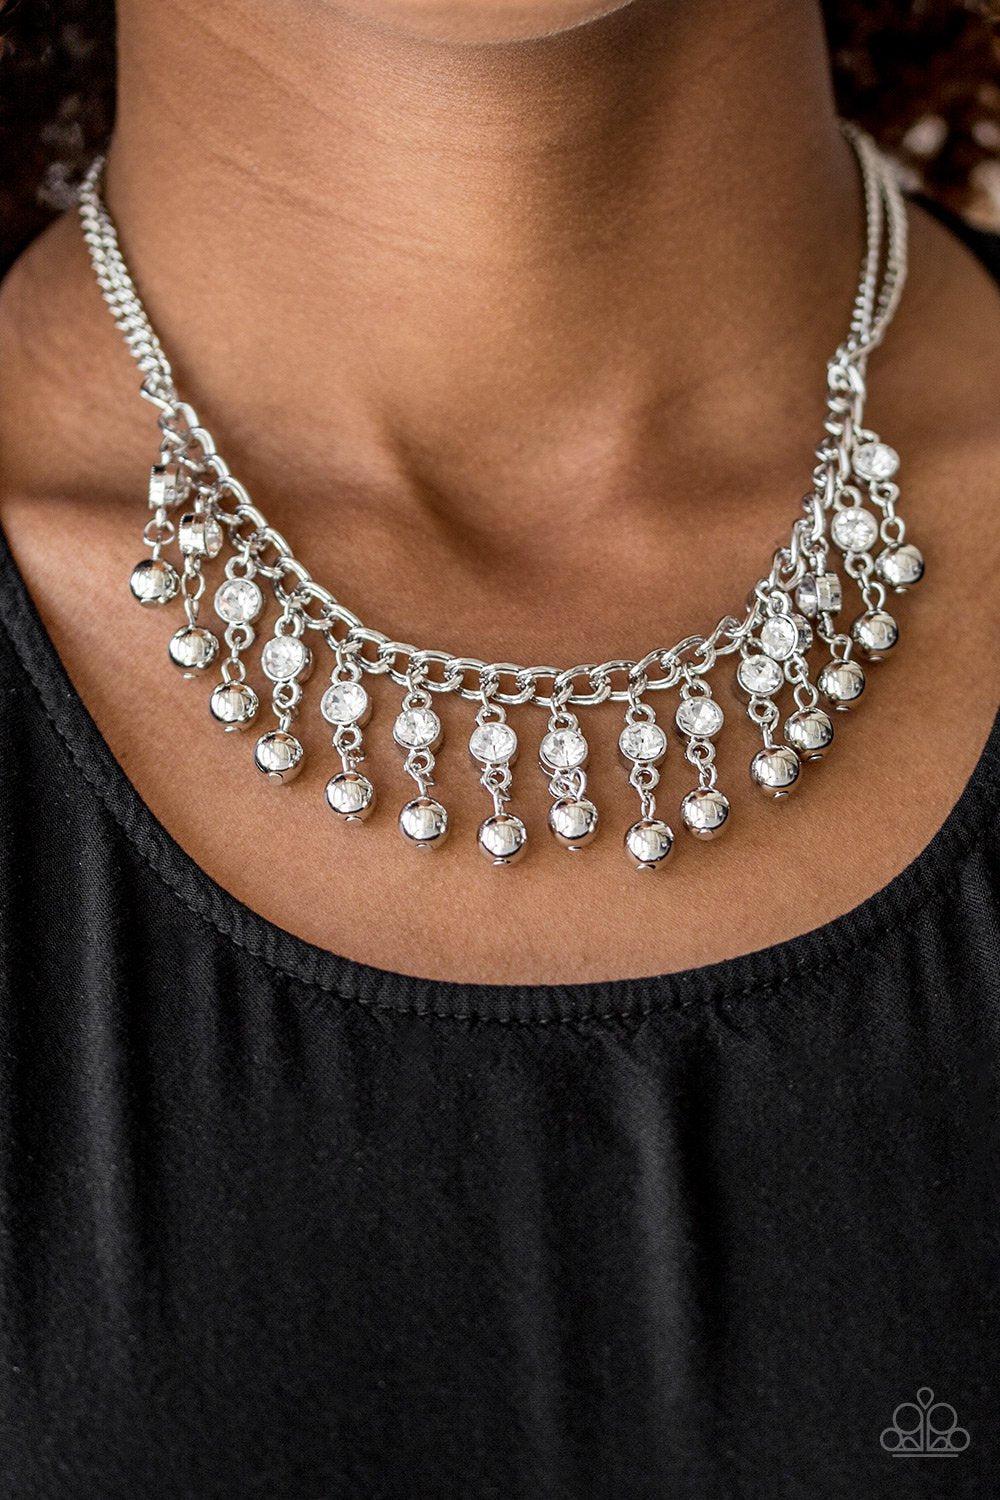 Pageant Queen Silver and White Rhinestone Necklace - Paparazzi Accessories-CarasShop.com - $5 Jewelry by Cara Jewels